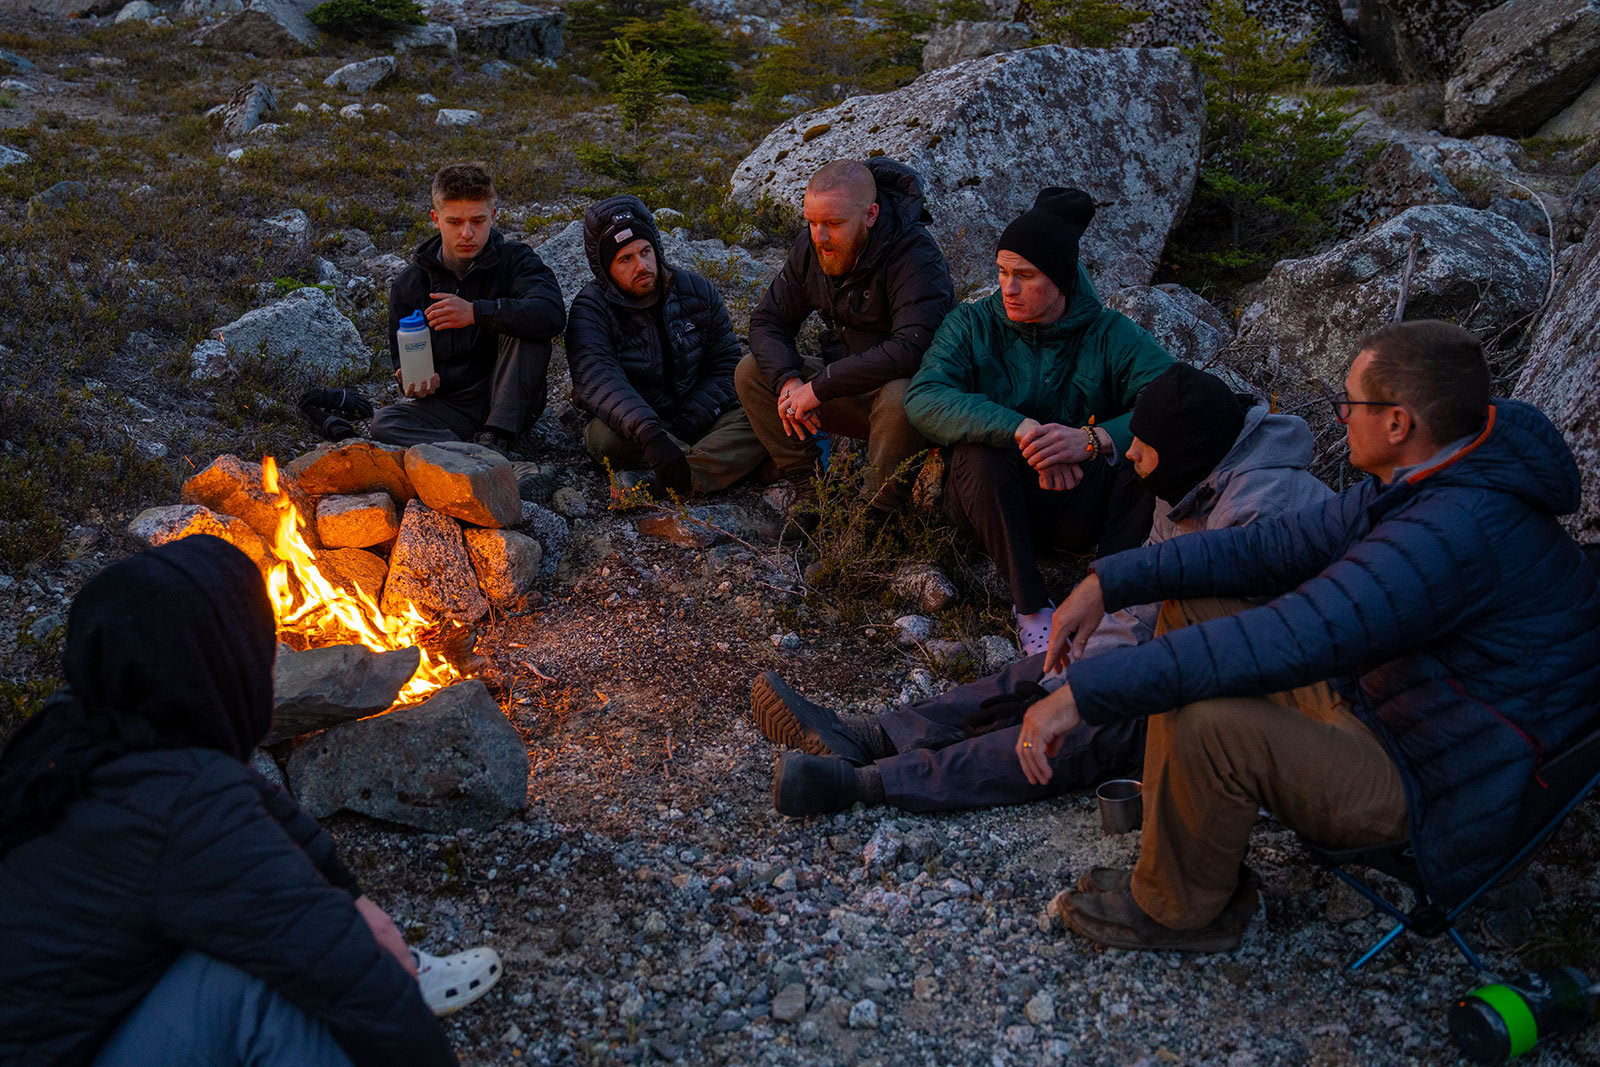 At dusk, young men sit in front of a fire and talk about recovery and A A.